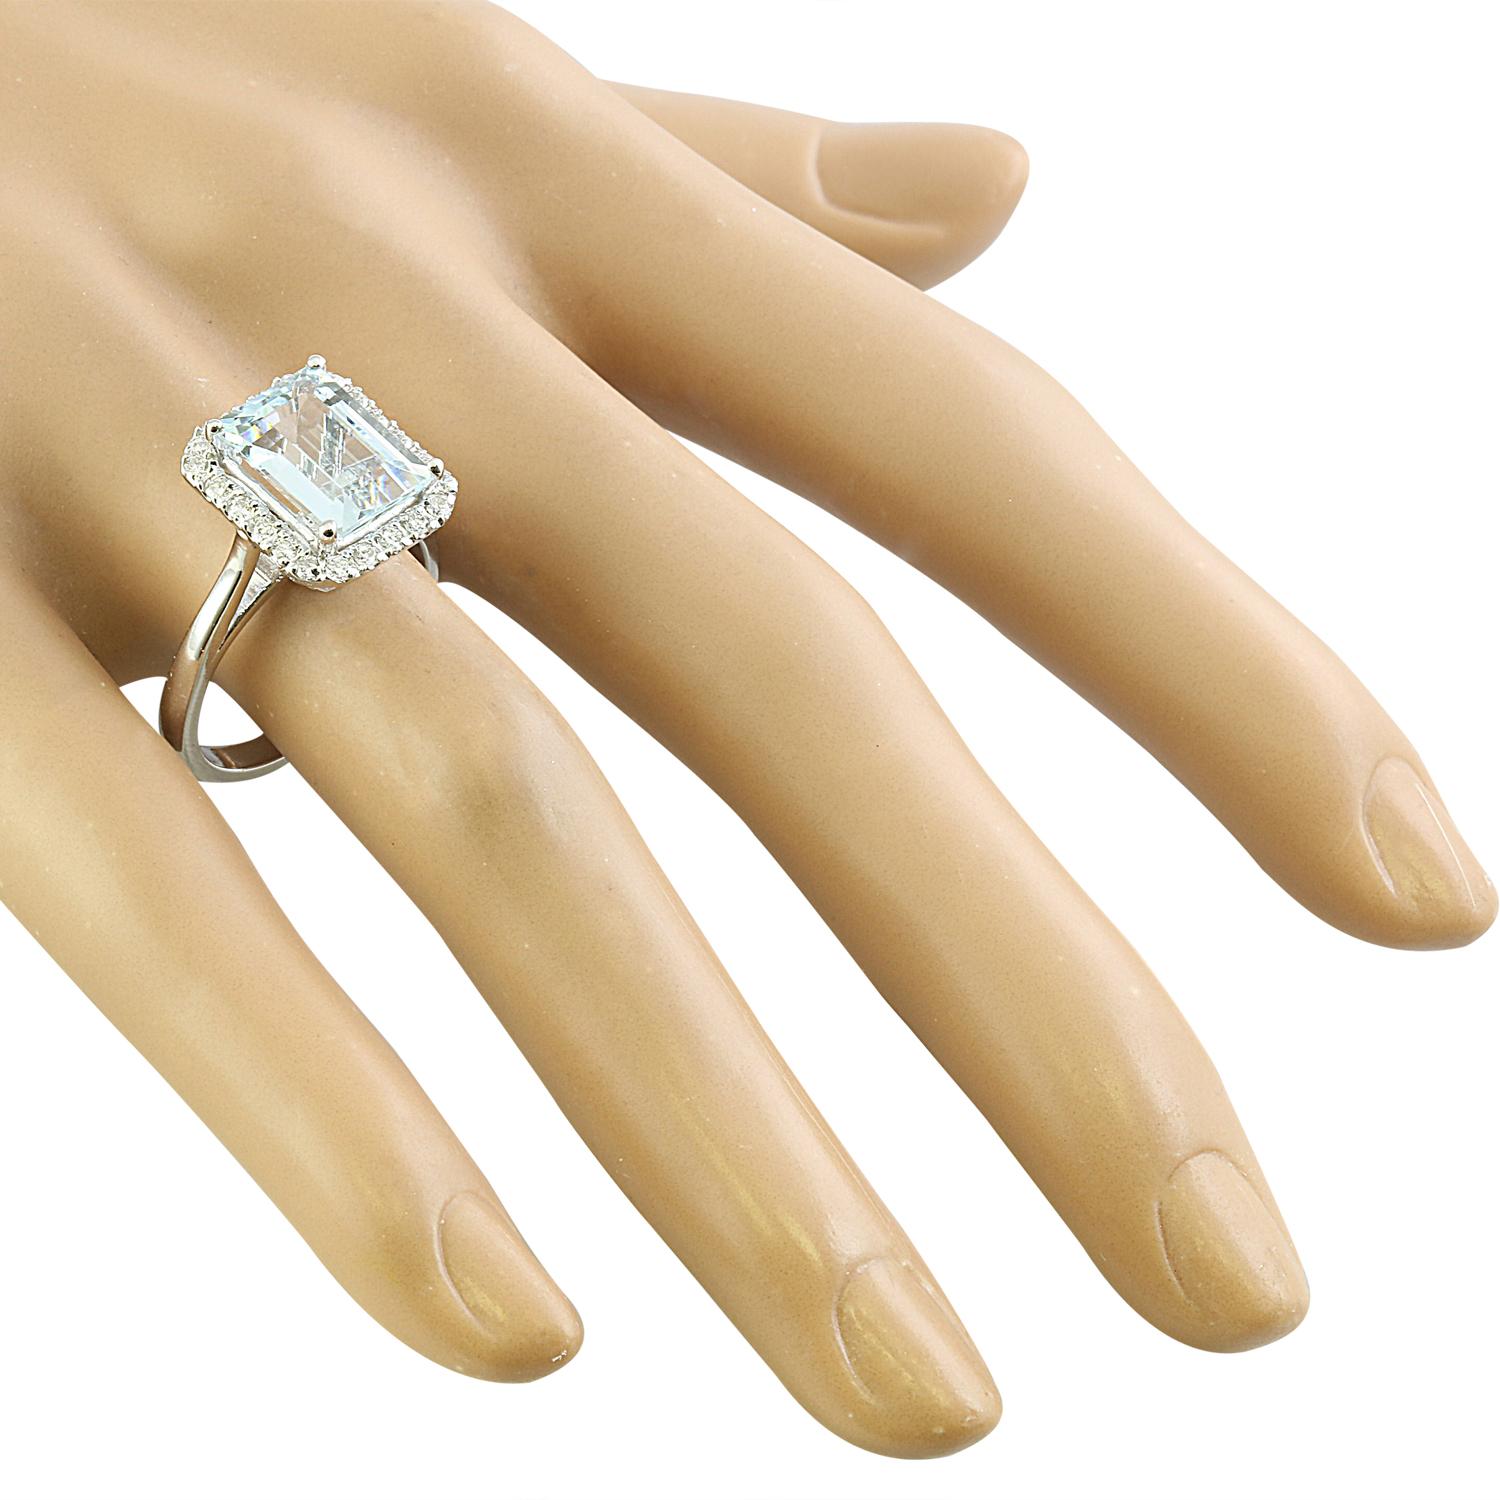 Natural Aquamarine Diamond Ring: Exquisite Beauty in 14K Solid White Gold In New Condition For Sale In Los Angeles, CA